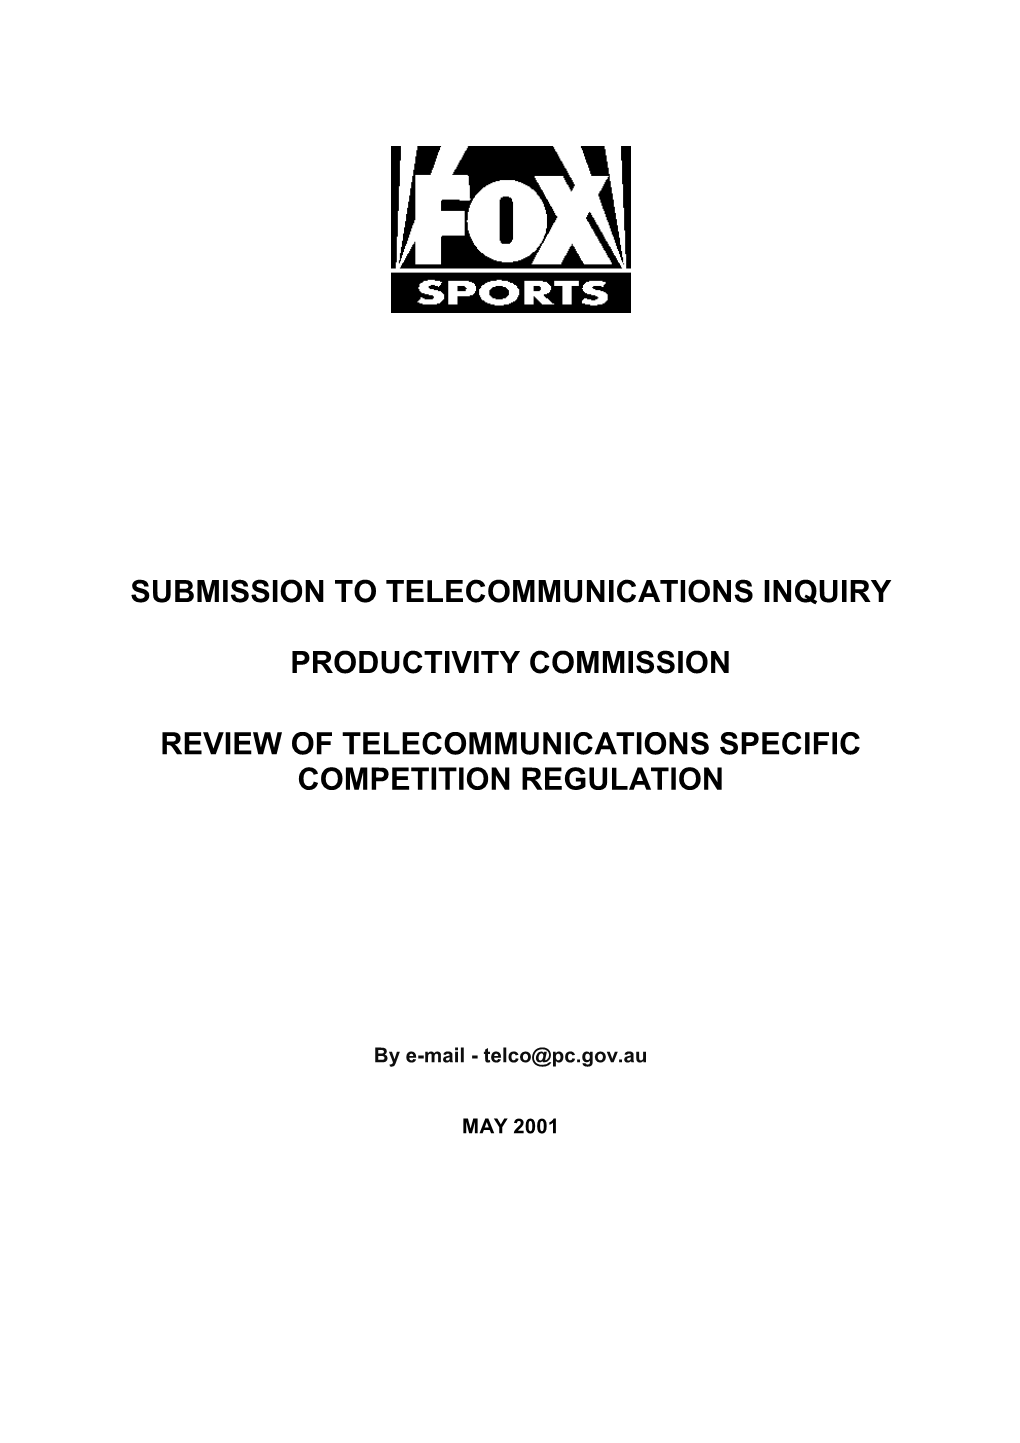 Submission to Telecommunications Inquiry